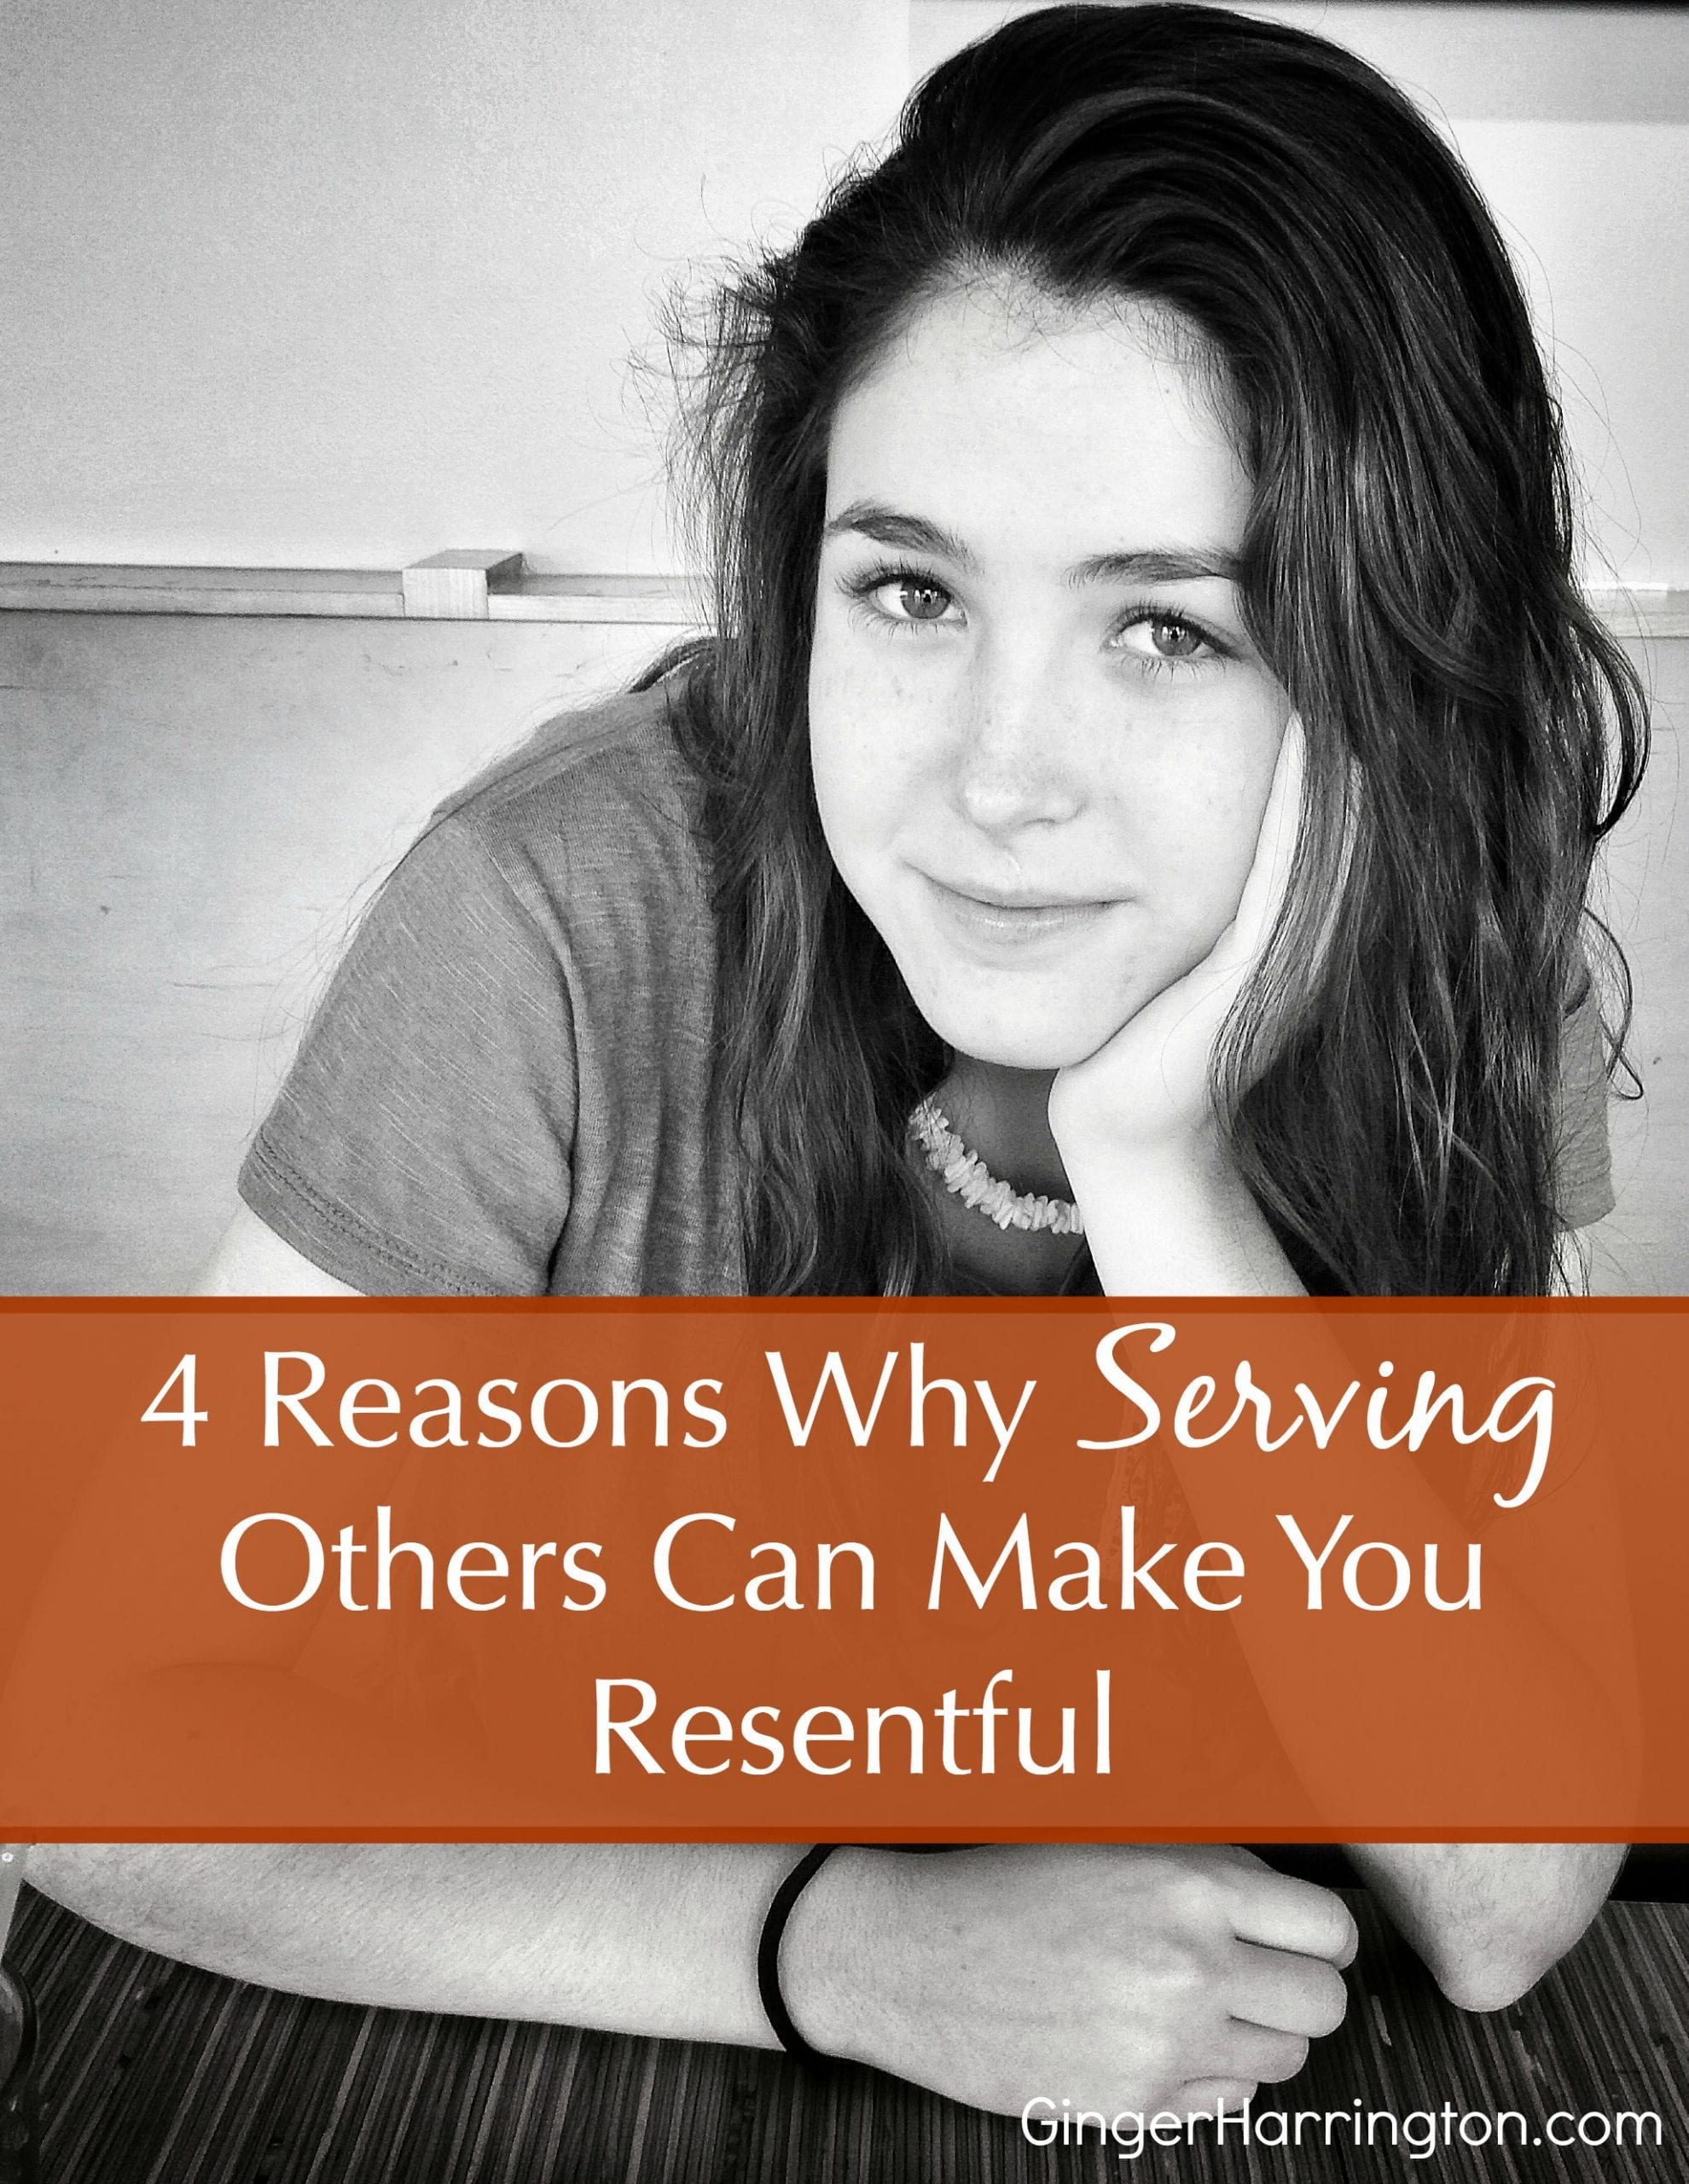 Four Reasons Why Serving Others Can Make You Resentful